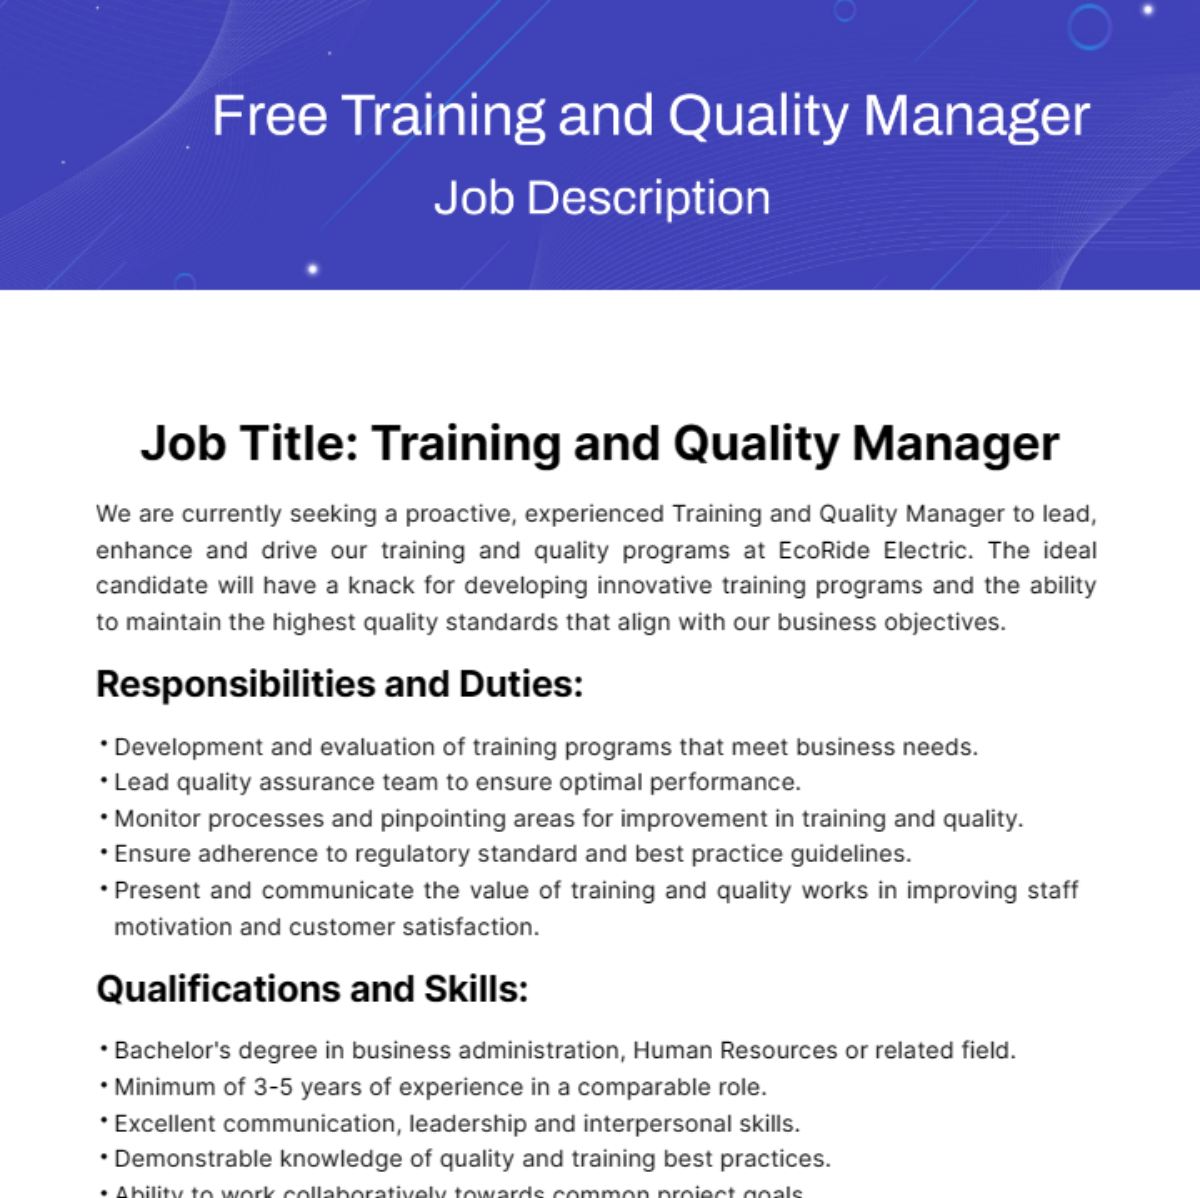 Free Training and Quality Manager Job Description Template